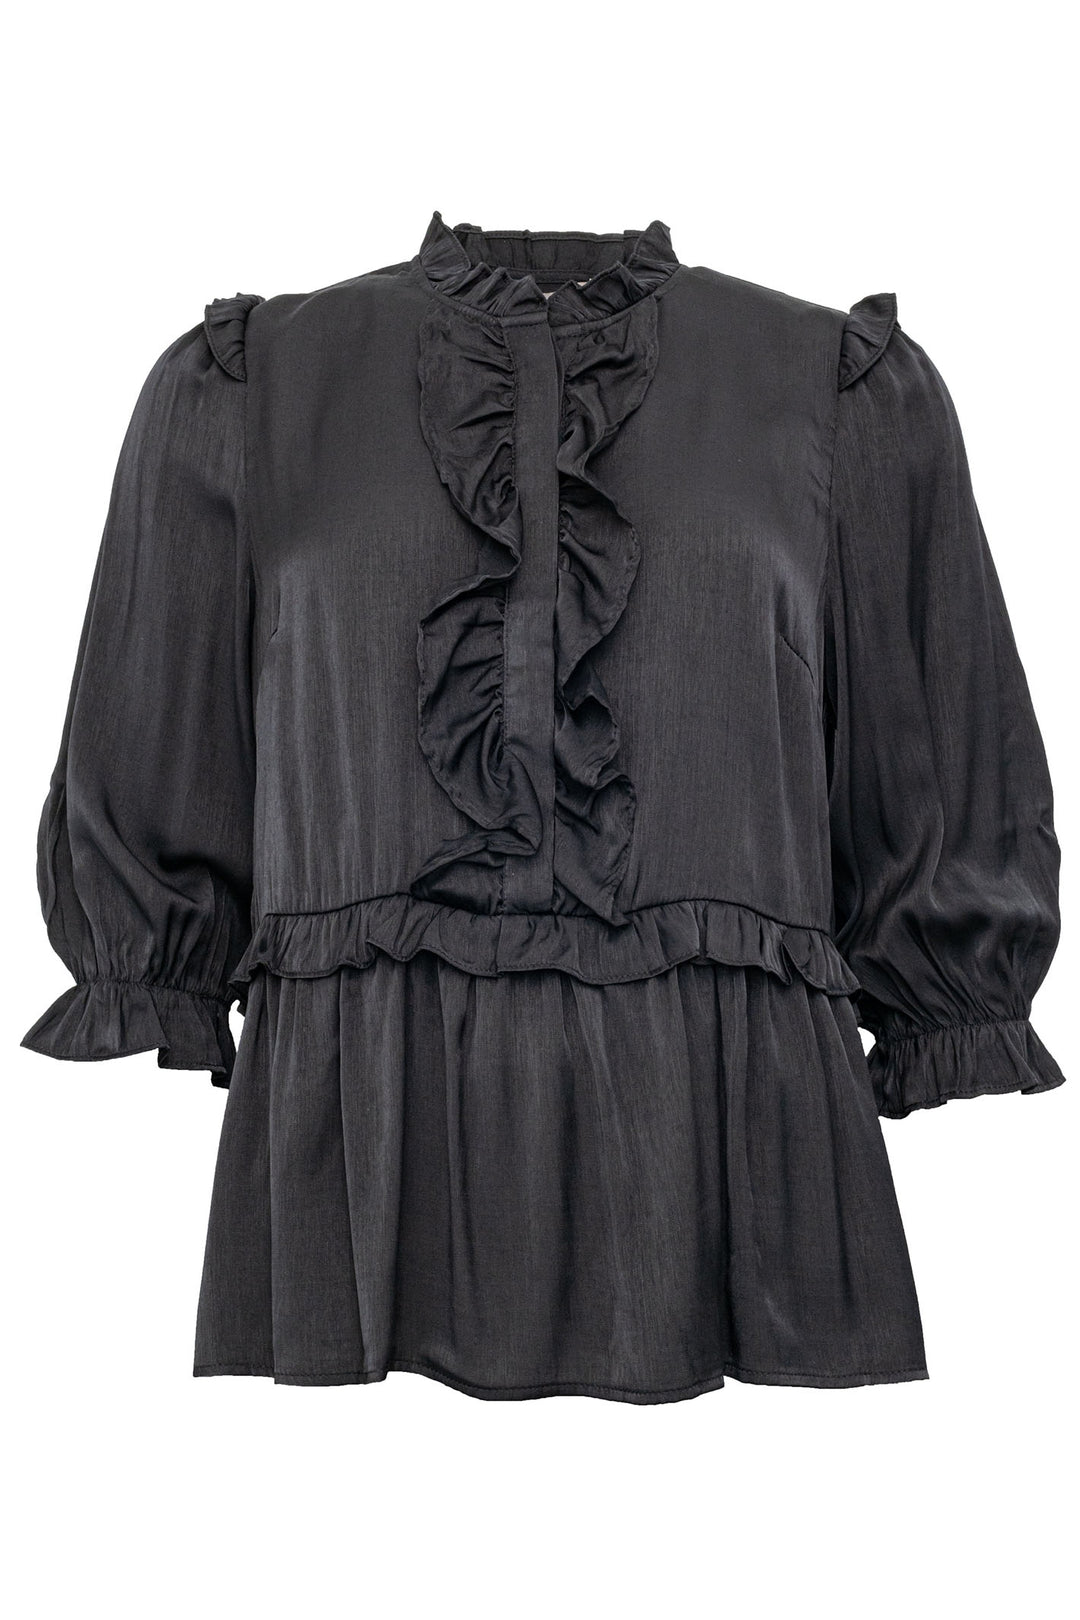 Costa Mani 2401140 Black Charly Ruffle Blouse - Experience Boutique